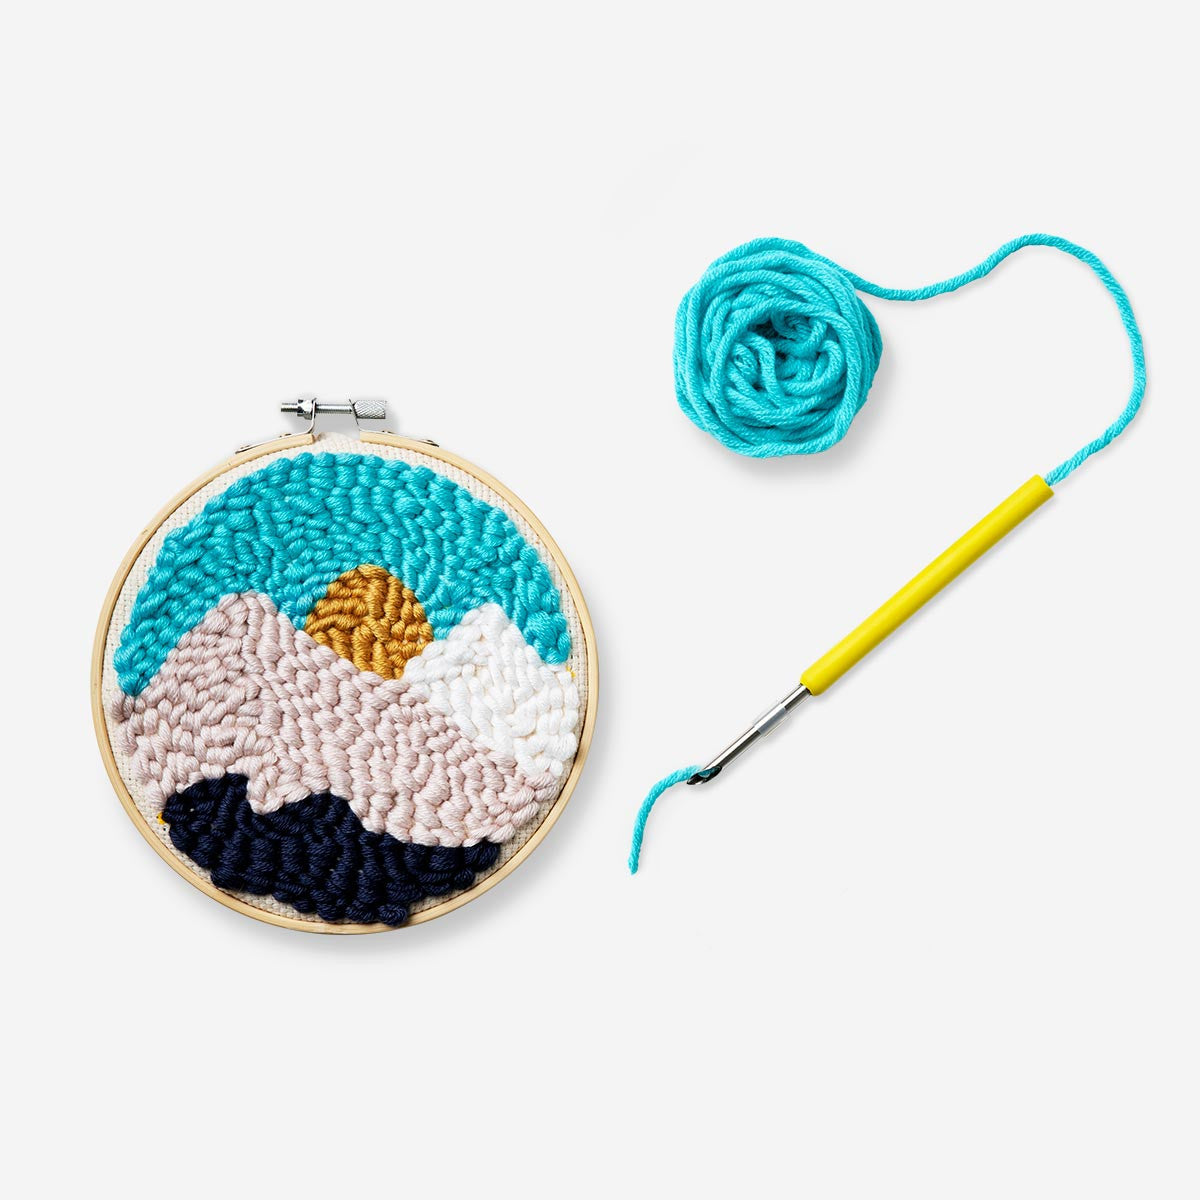 DIY Landscape Punch Needle Embroidery Kit Carpet Tufting Loop Pile Cross  Stitch for Beginner Handcraft Wall Painting Home Decor - AliExpress